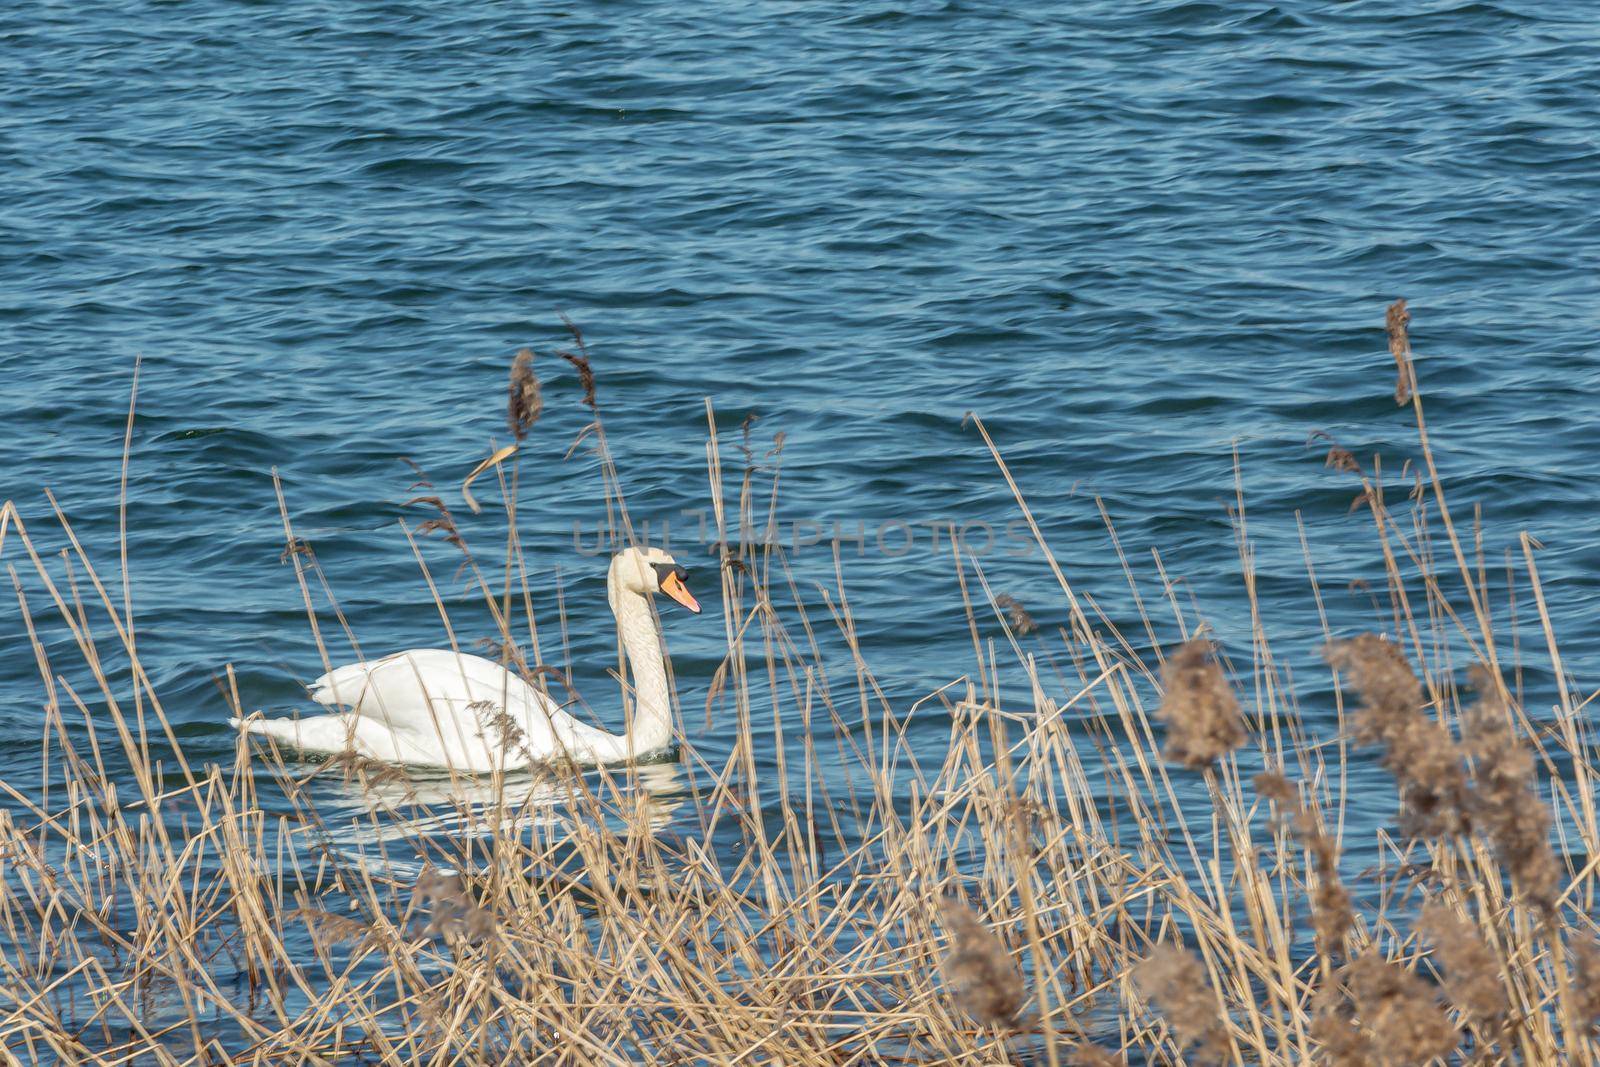 white swan swims on the water behind the coastal reeds. Stock Photo